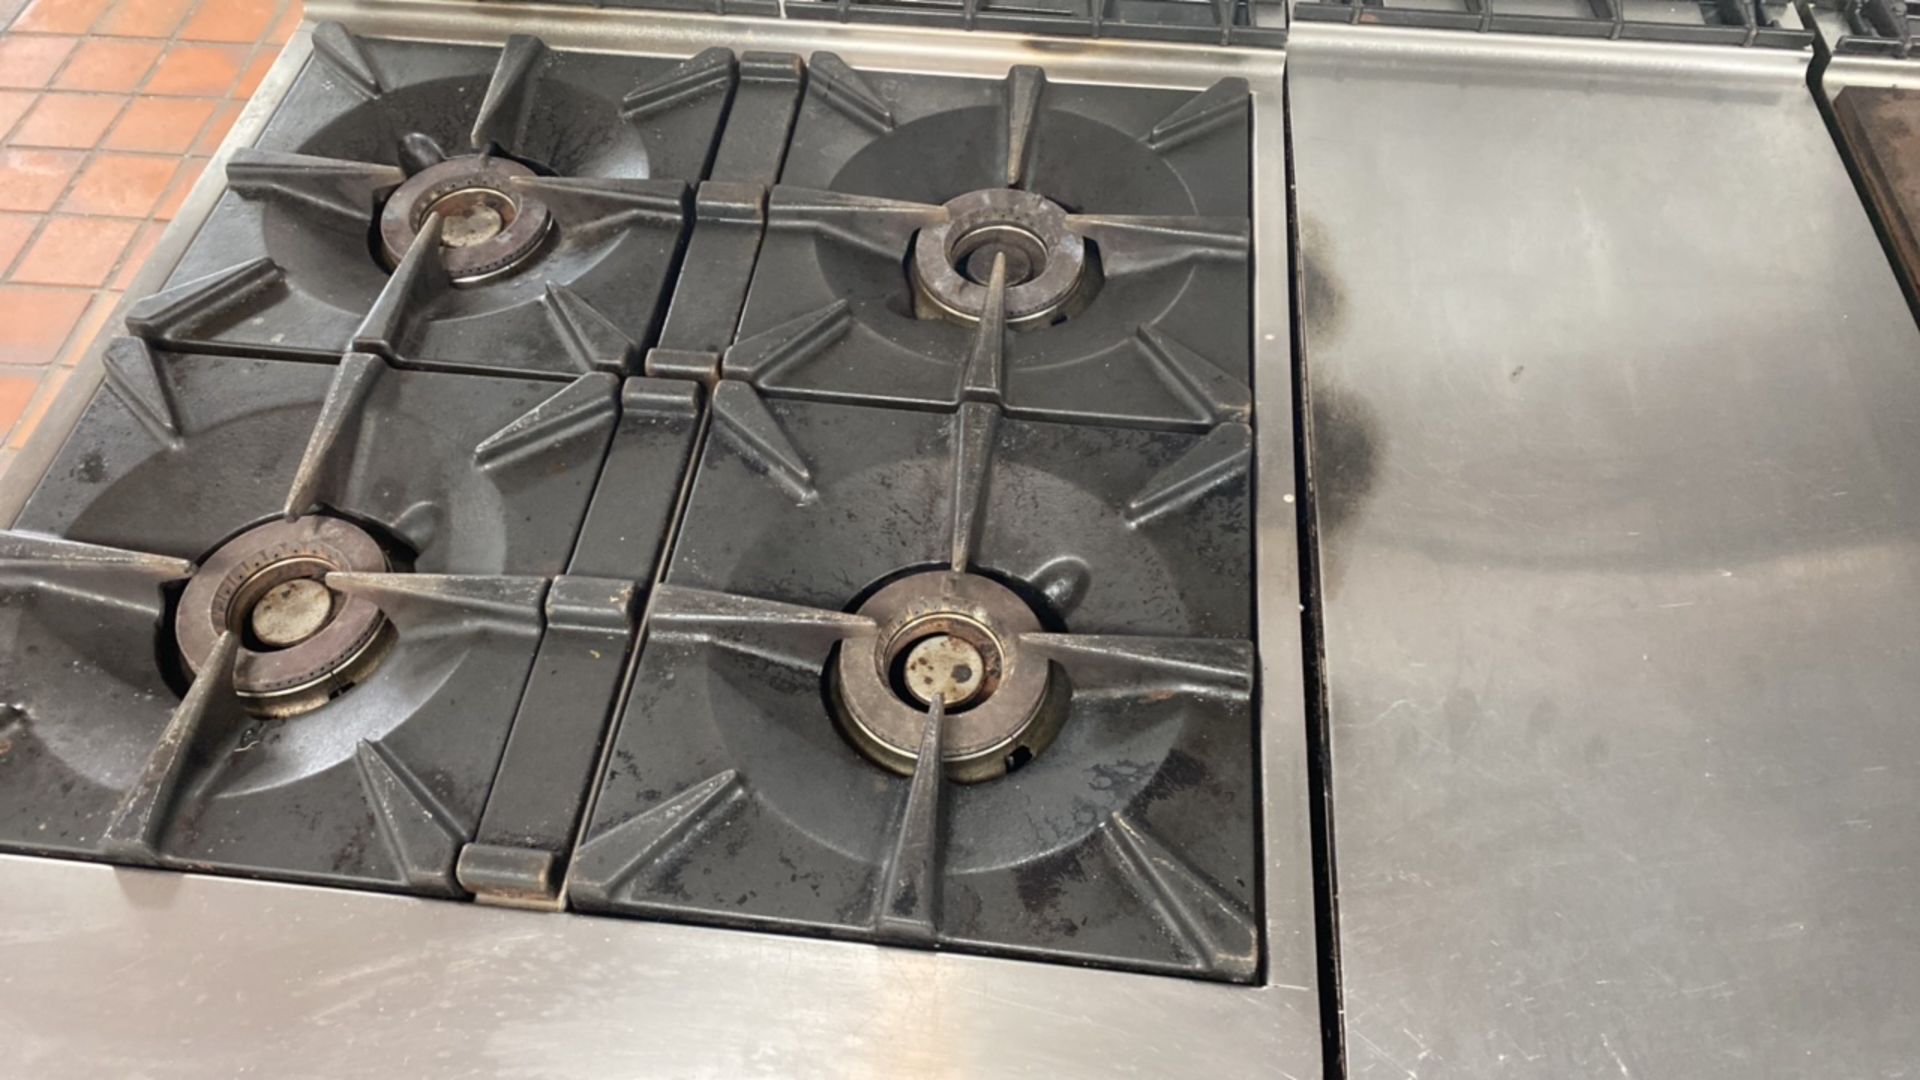 Electrolux Hob With Oven Unit Underneath Including Storage - Image 7 of 10